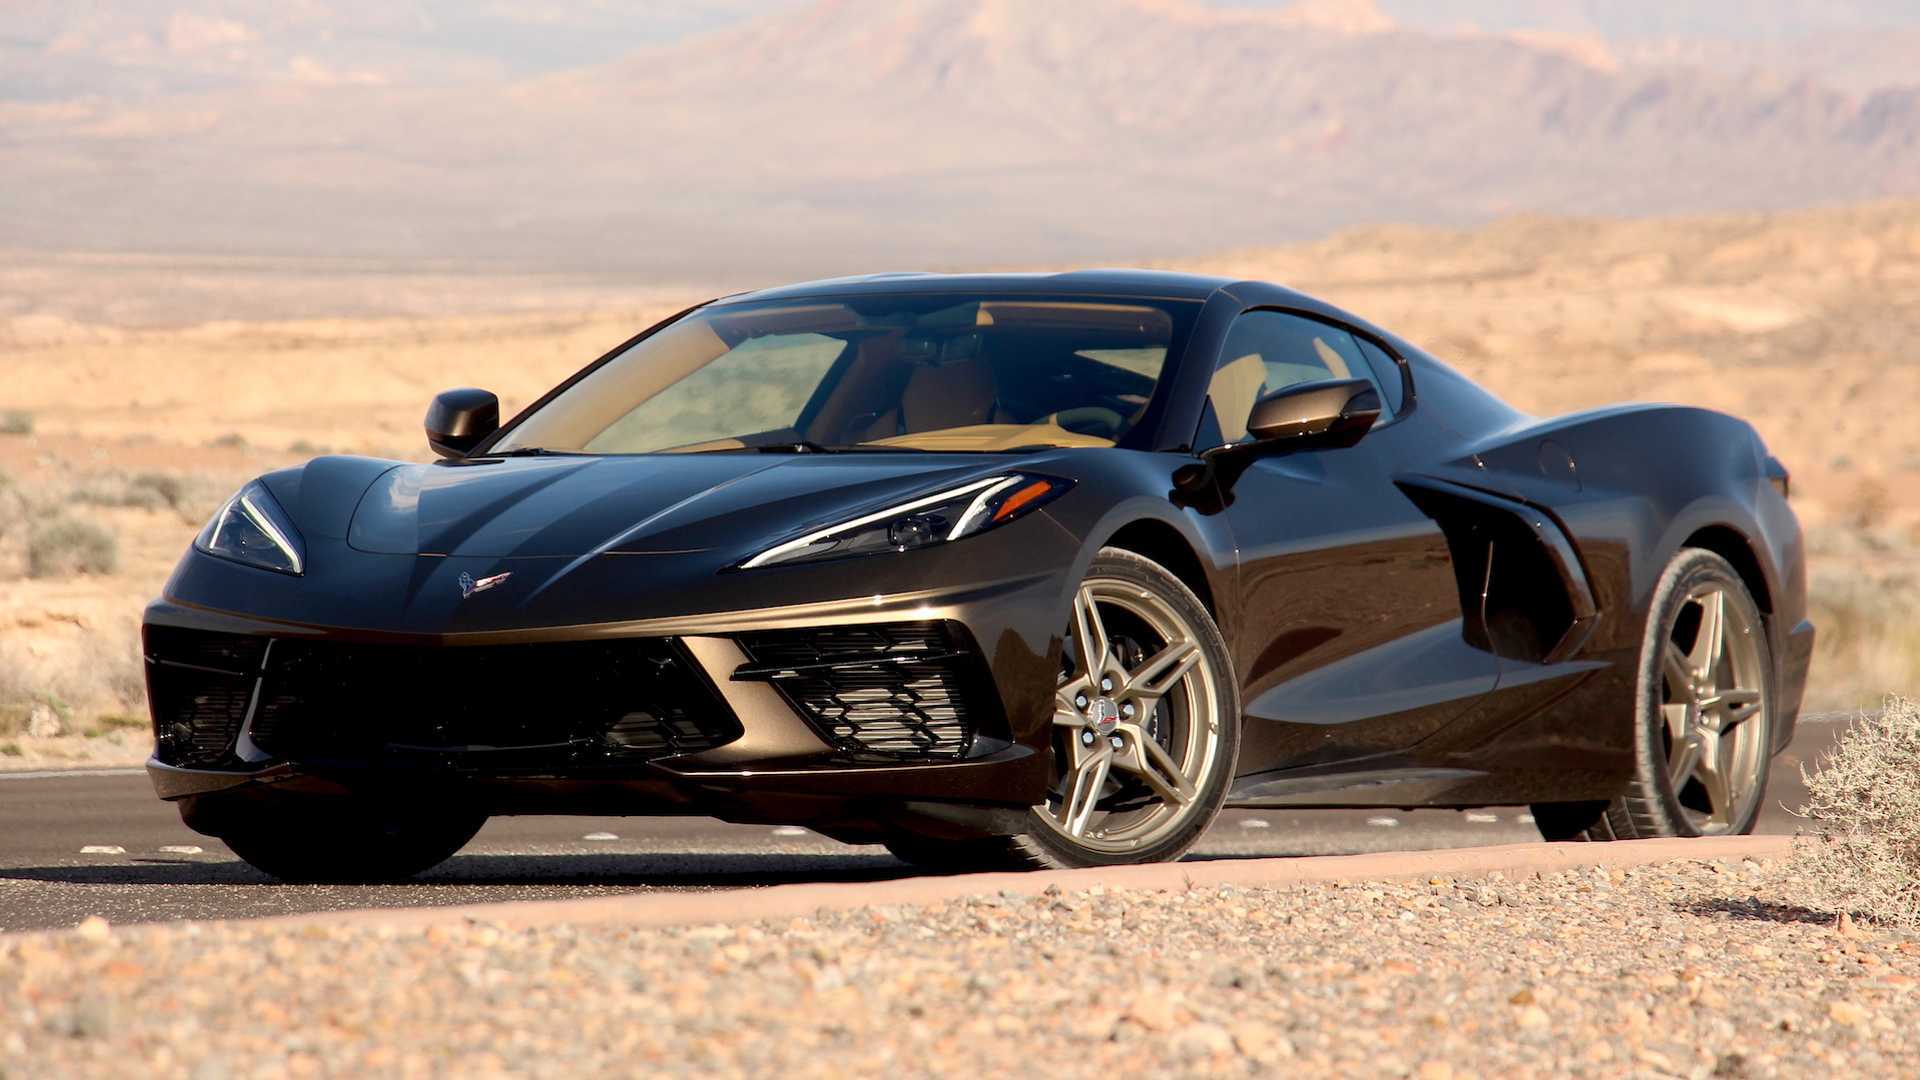 2020 Chevrolet Corvette First Drive Review: Mixed Emotions